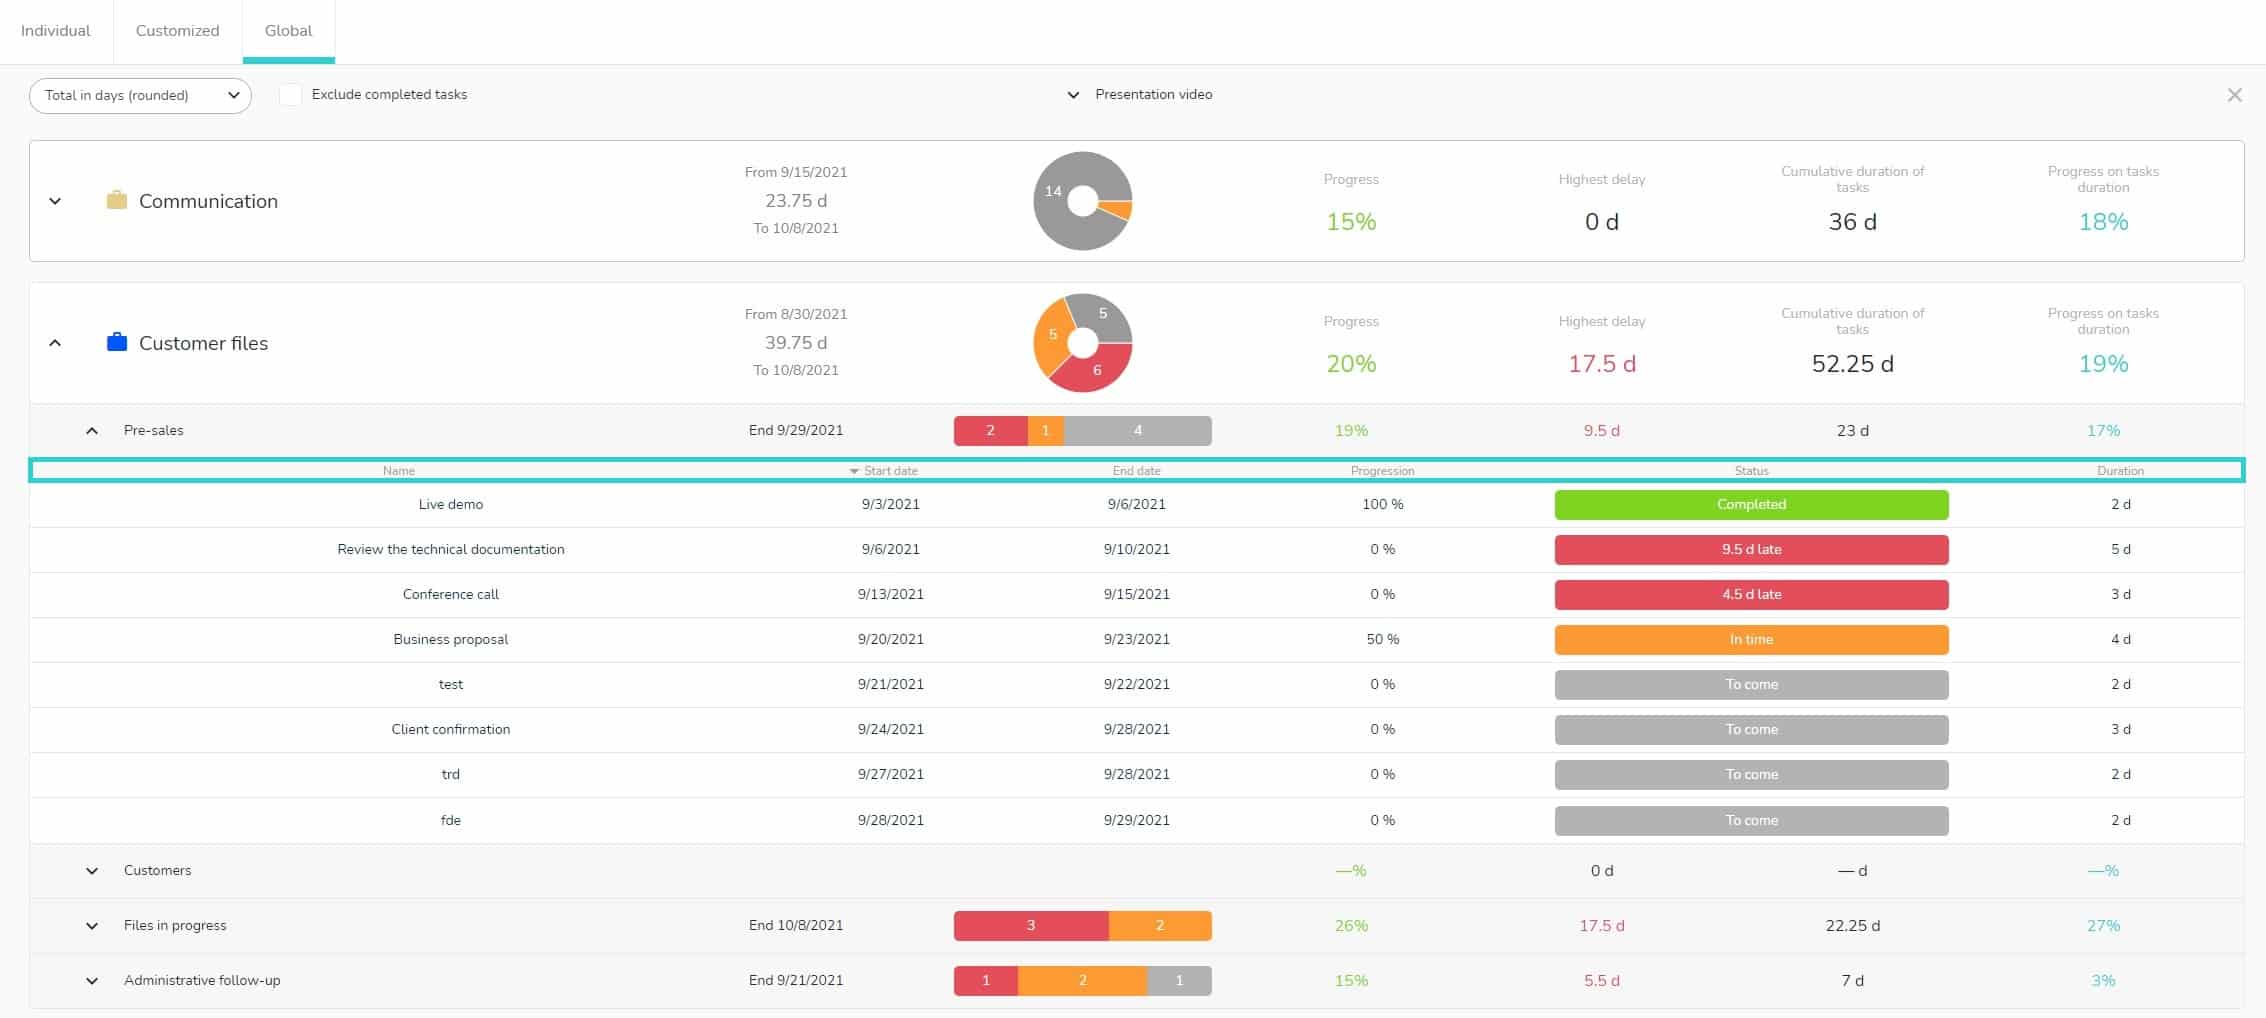 Sort tasks by various criteria in the global dashboard